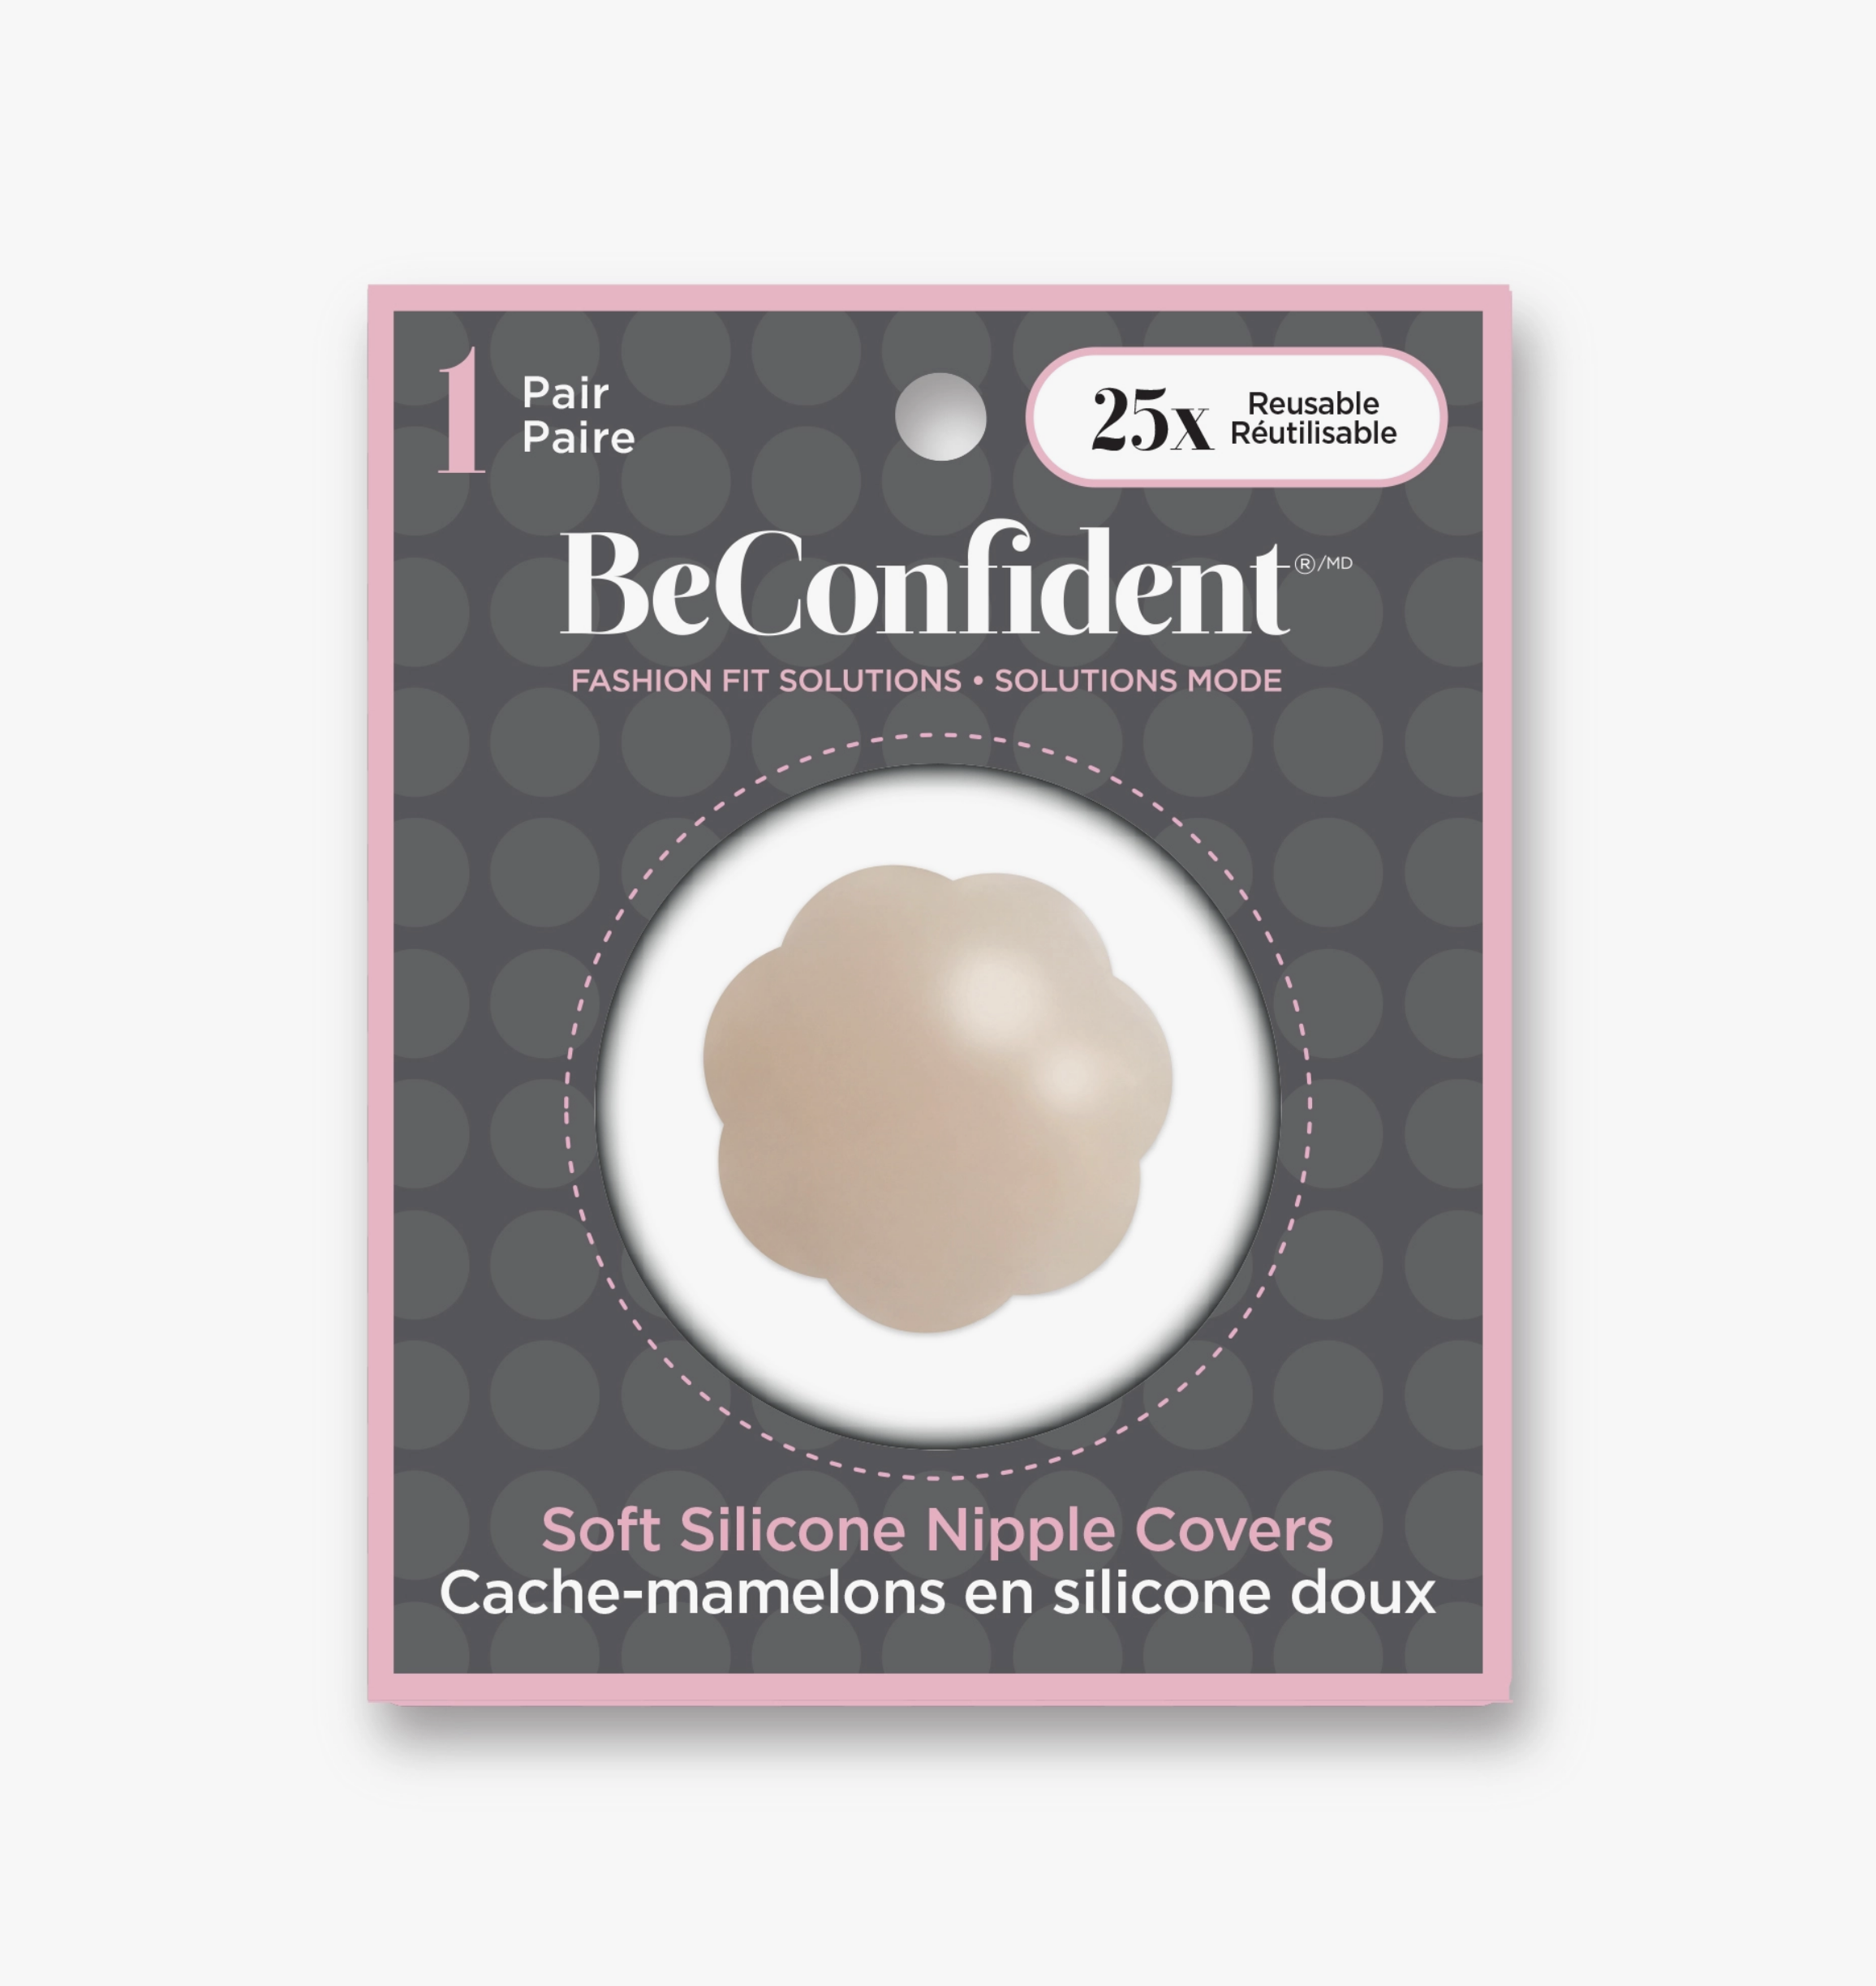 BeConfident Silicone Nipple Cover 1 Pair